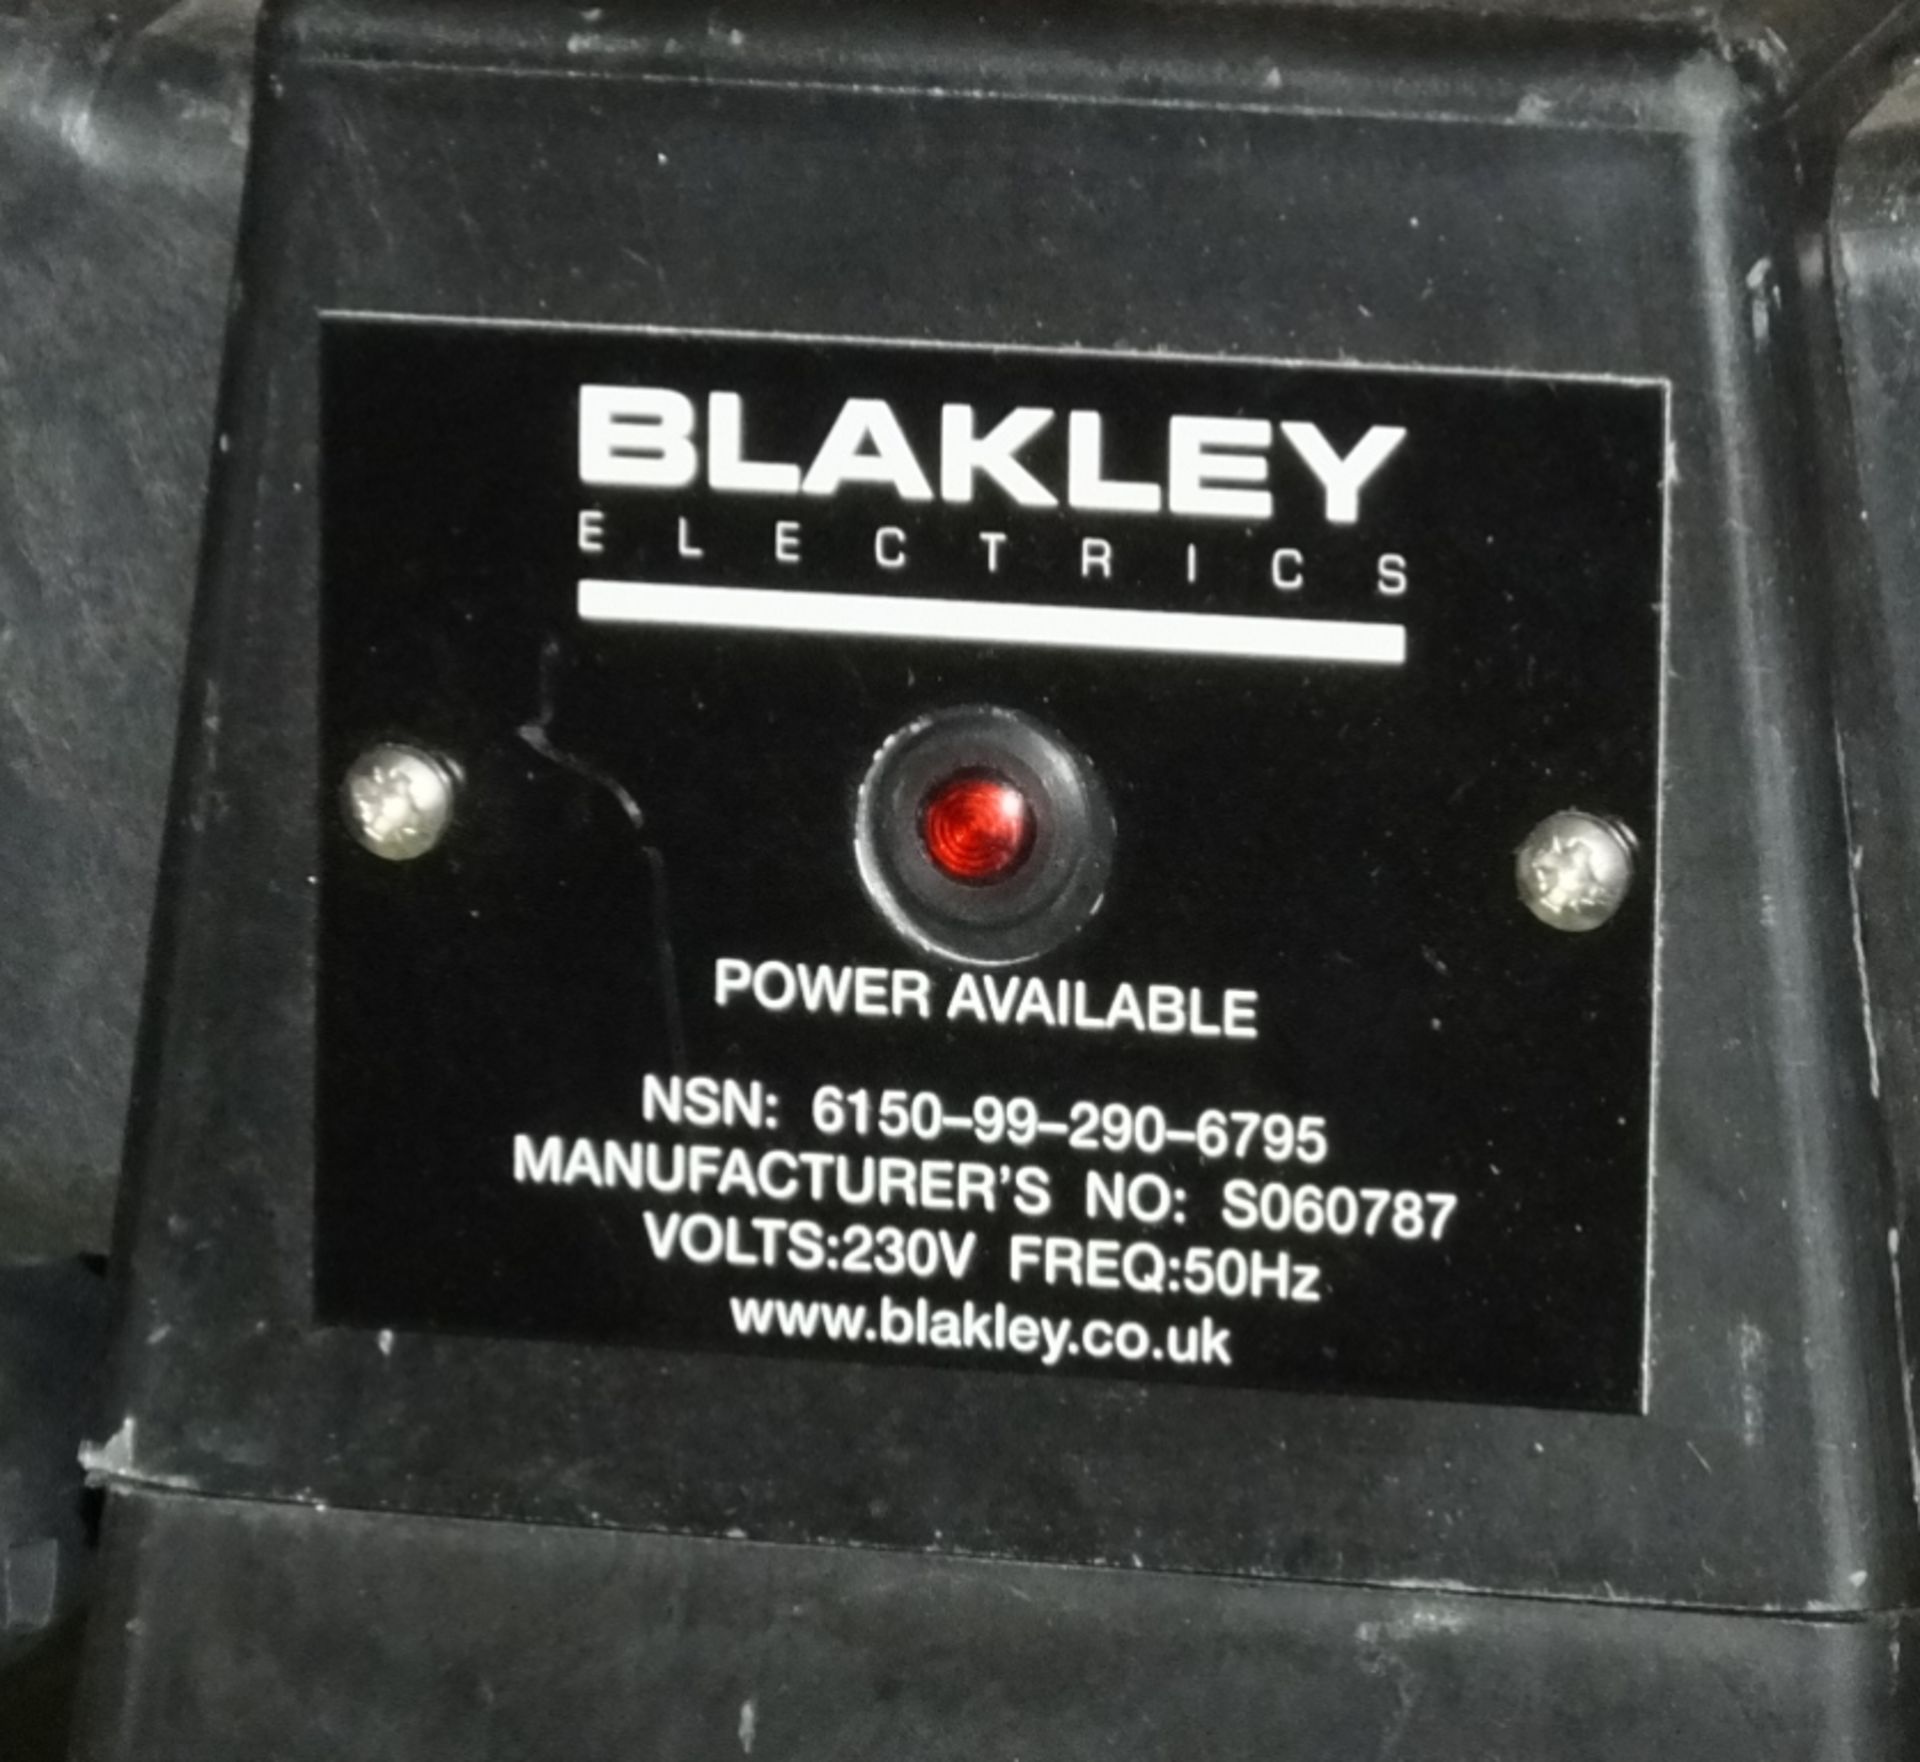 4x Blakley outdoor 230V portable junction boxes - Image 2 of 3